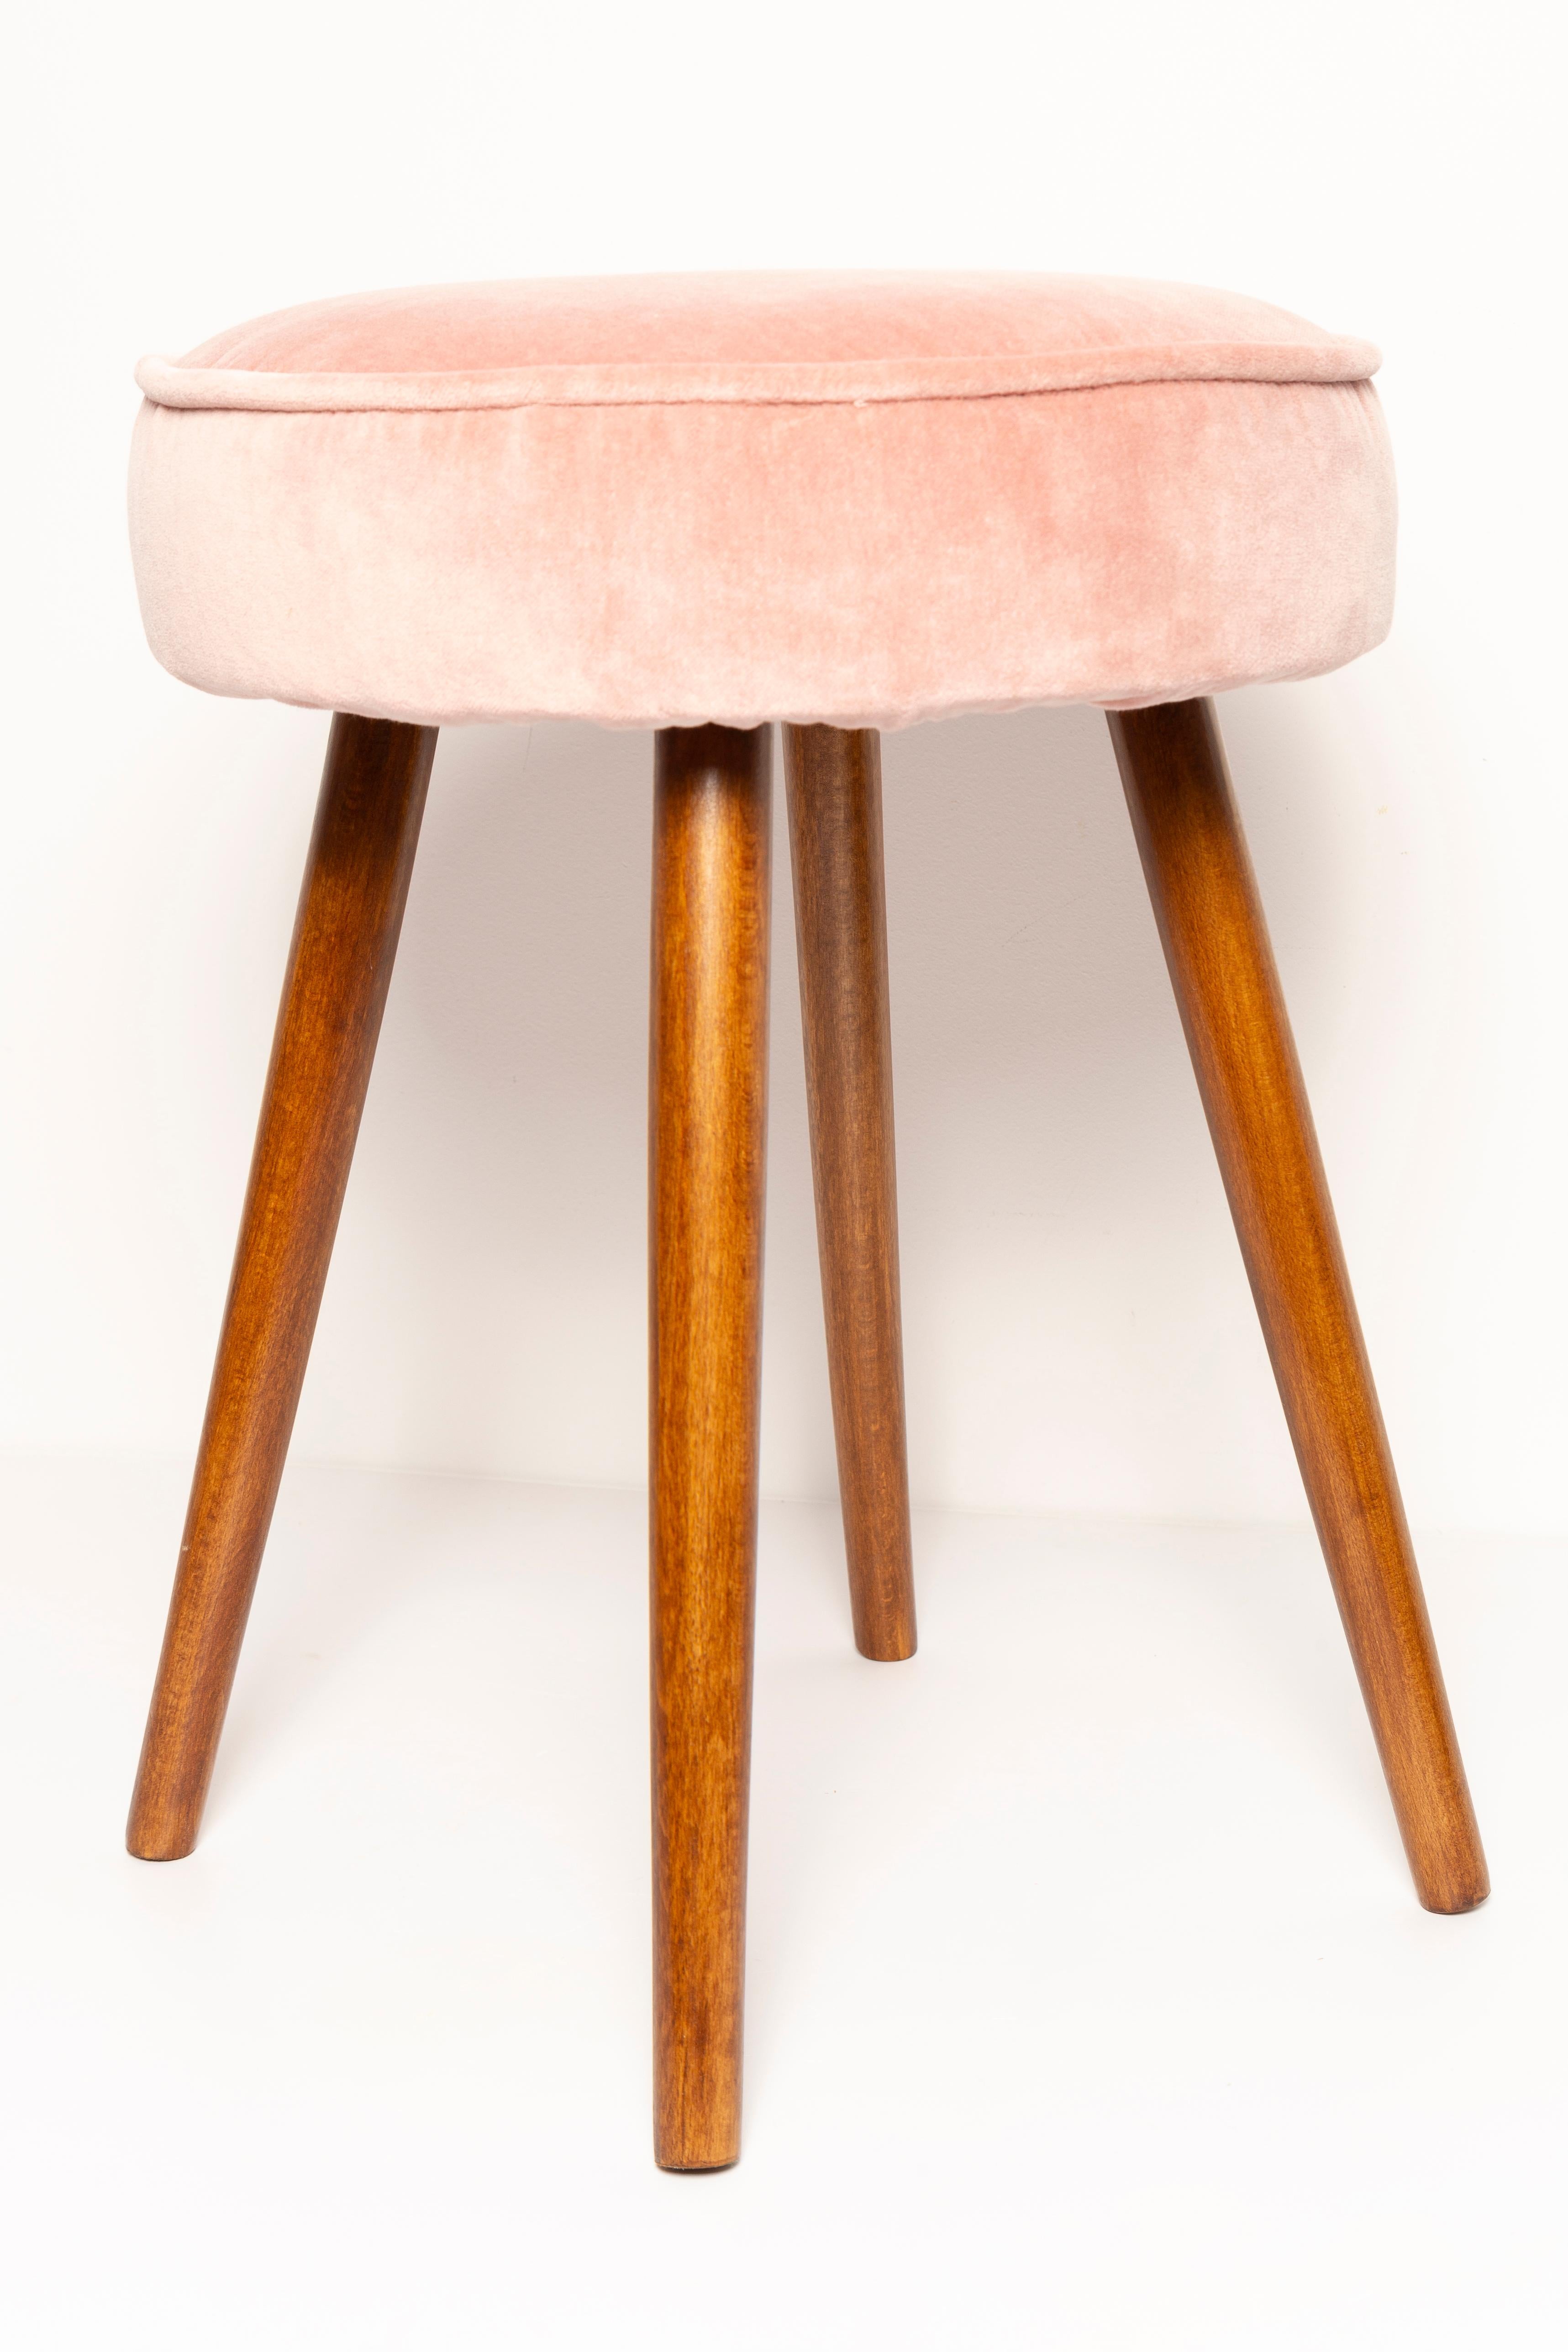 Mid-Century Modern Mid Century Baby Pink Stool, Europe, 1960s For Sale